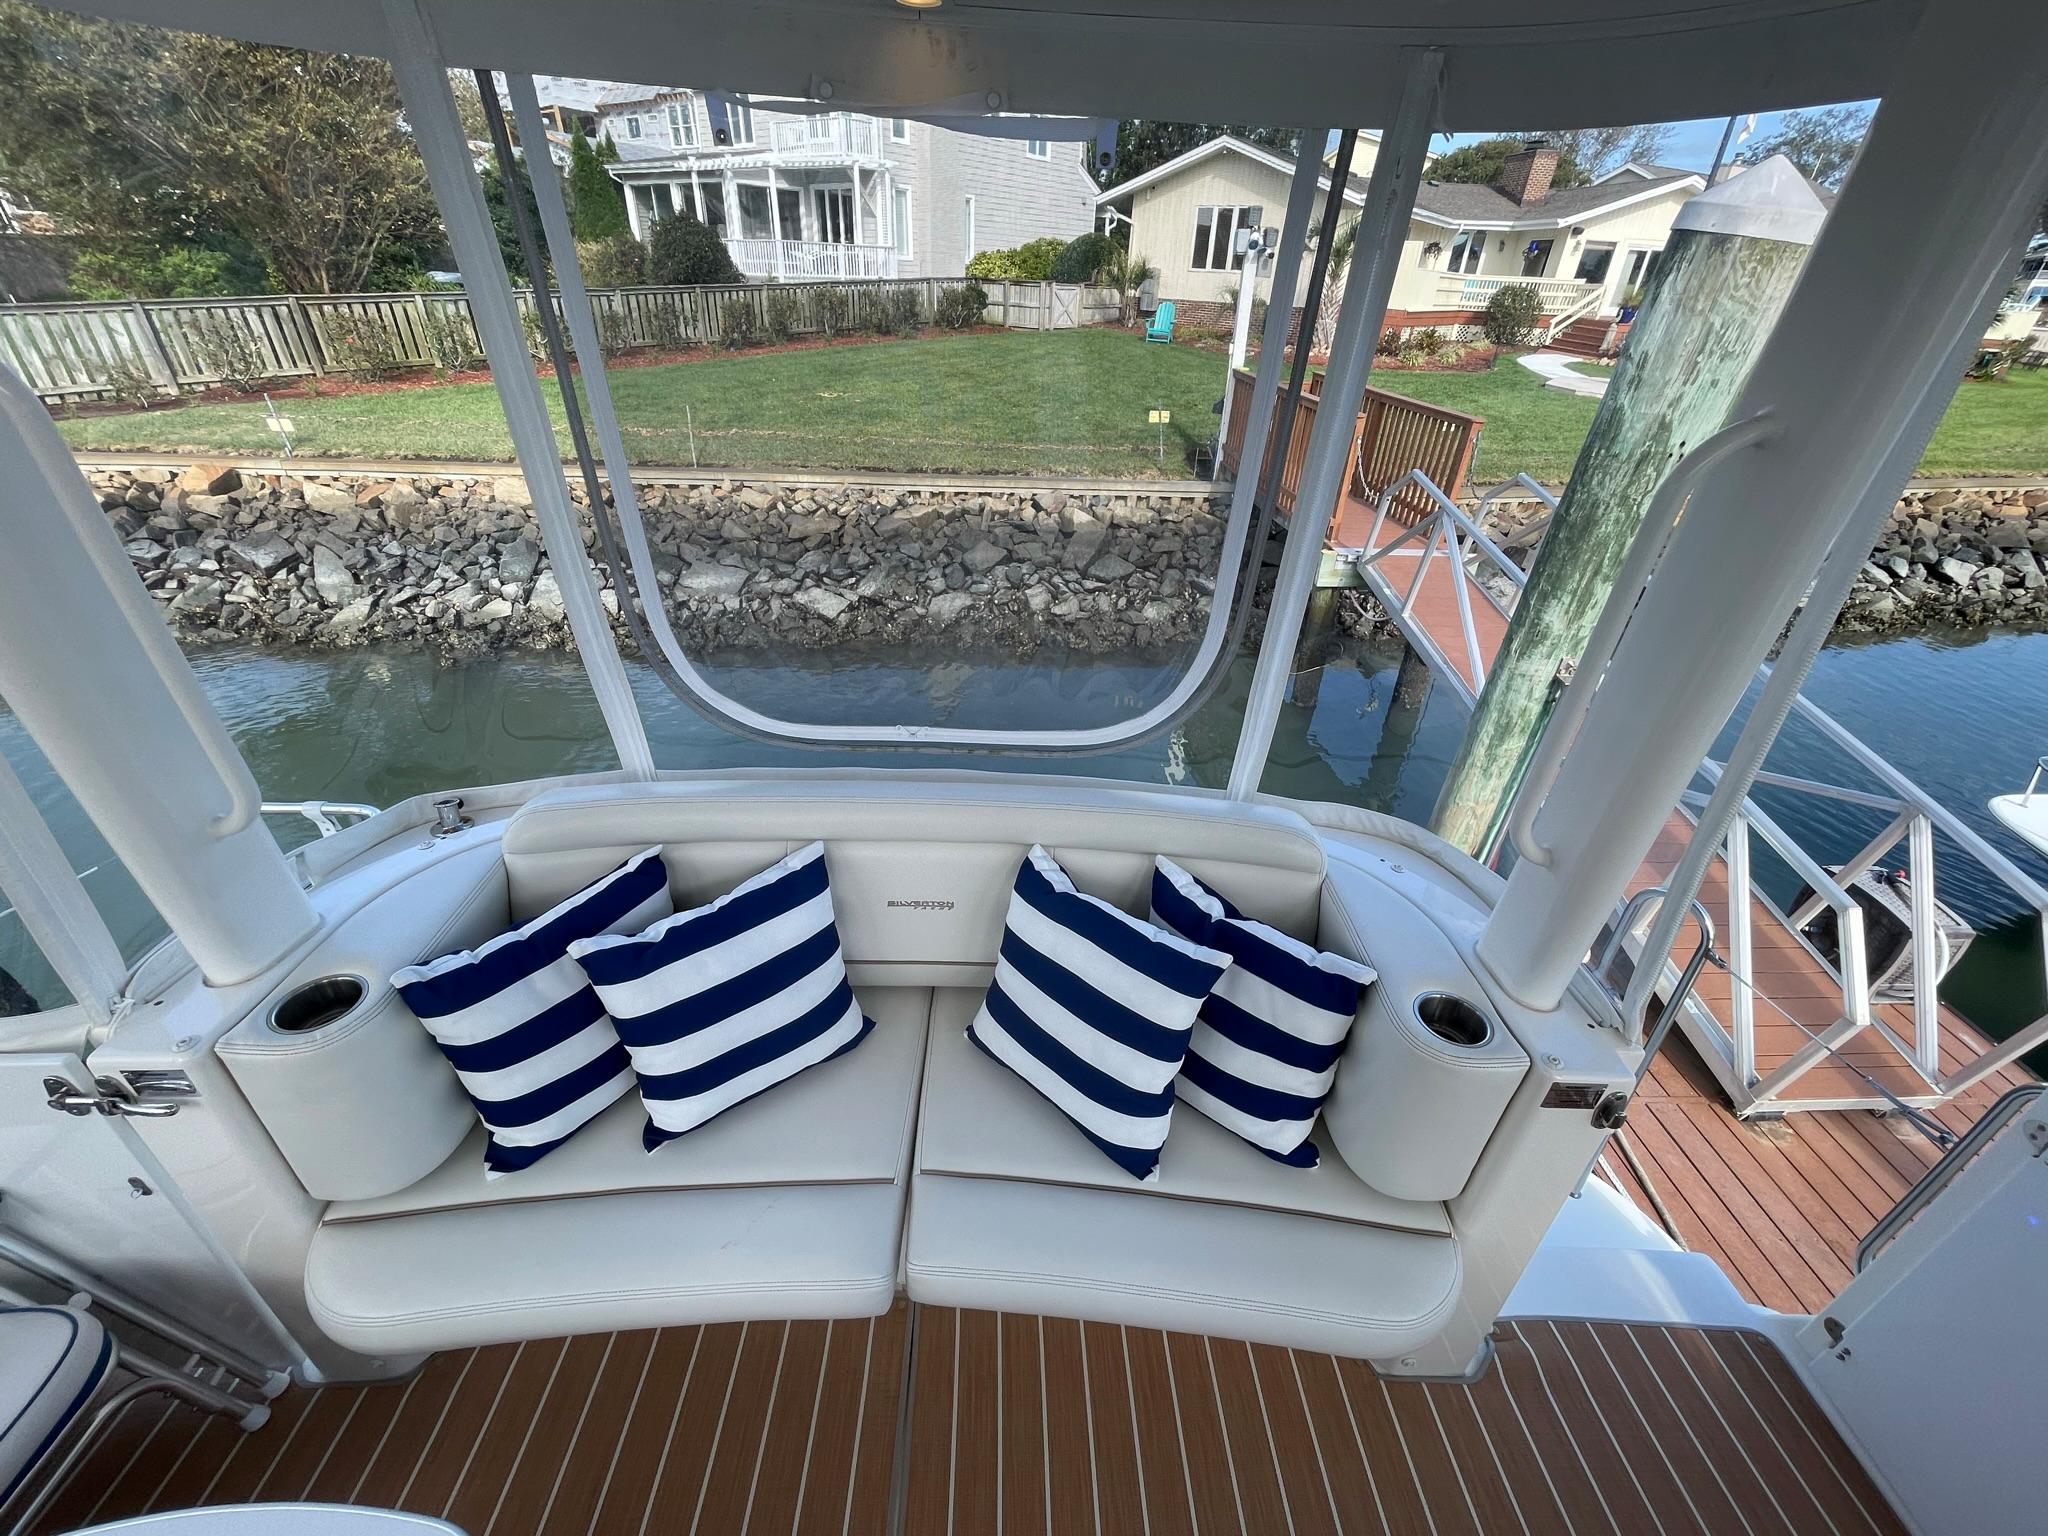 AFT DECK BUILT-IN LOUNGE SEATING